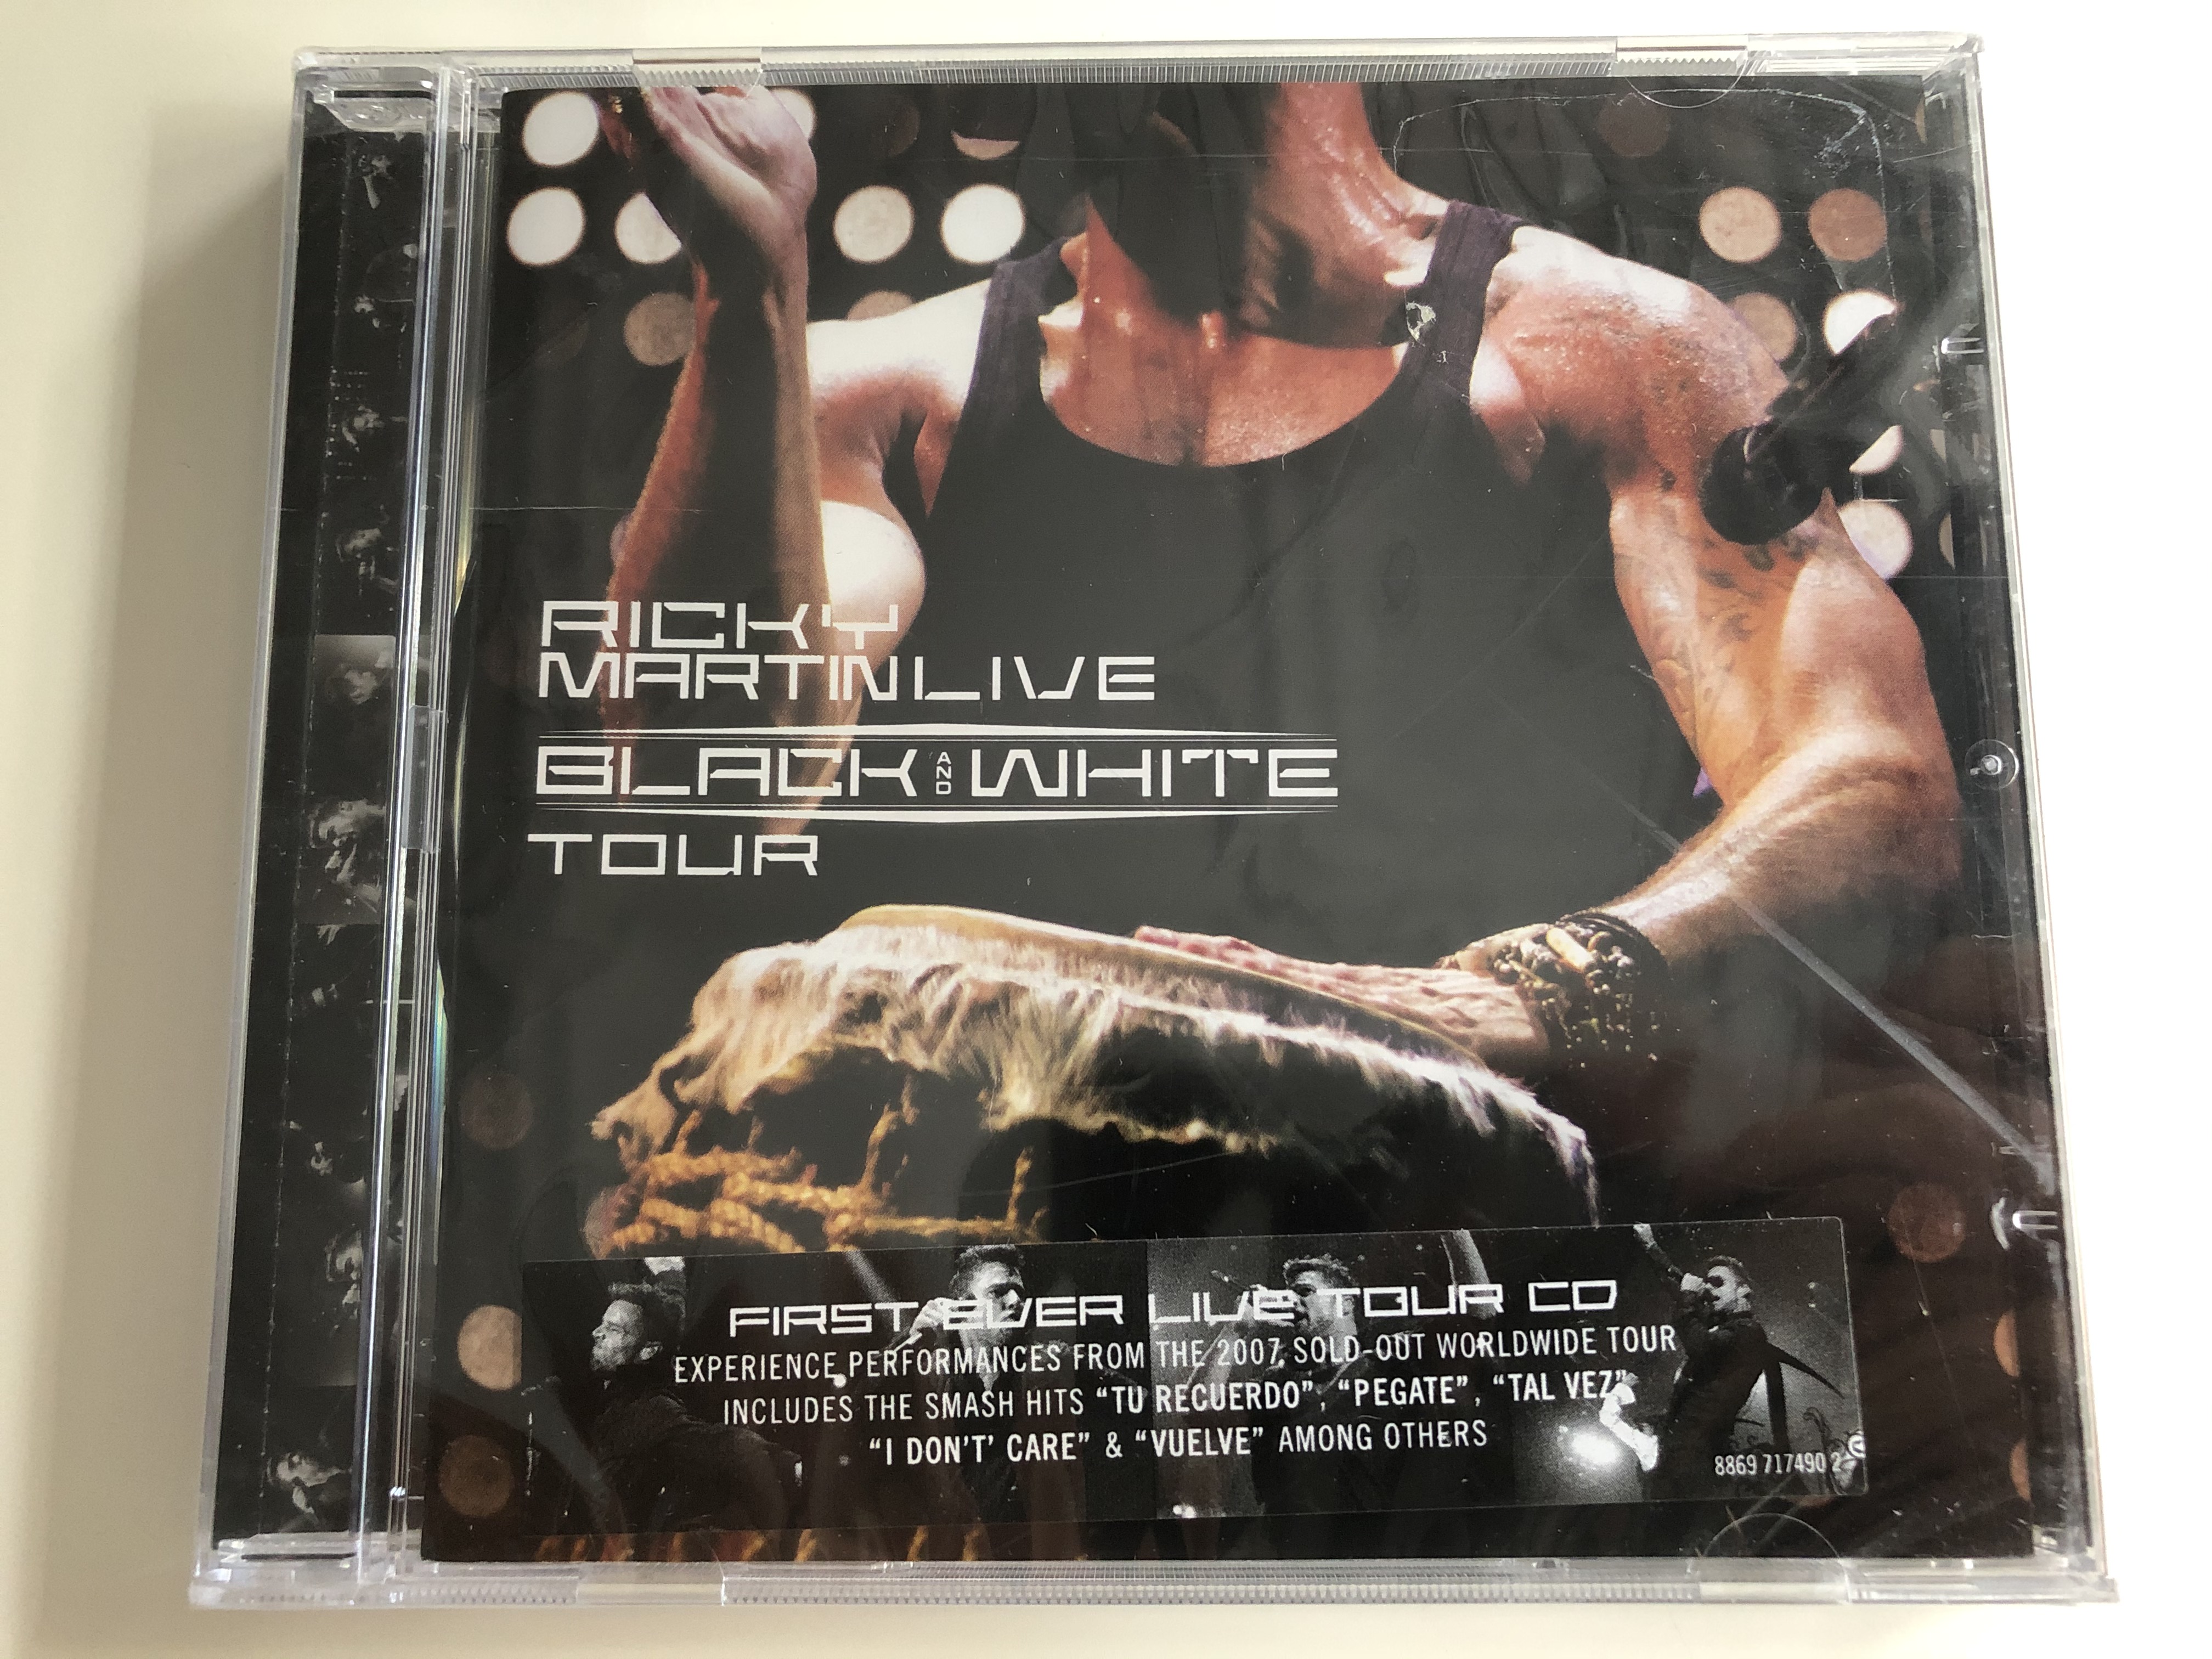 ricky-martin-live-black-and-white-tour-includes-the-smash-hits-tu-recuerdo-pegate-tal-vez-i-don-t-care-vuelve-among-others-sony-bmg-music-entertainment-audio-cd-200-1-.jpg